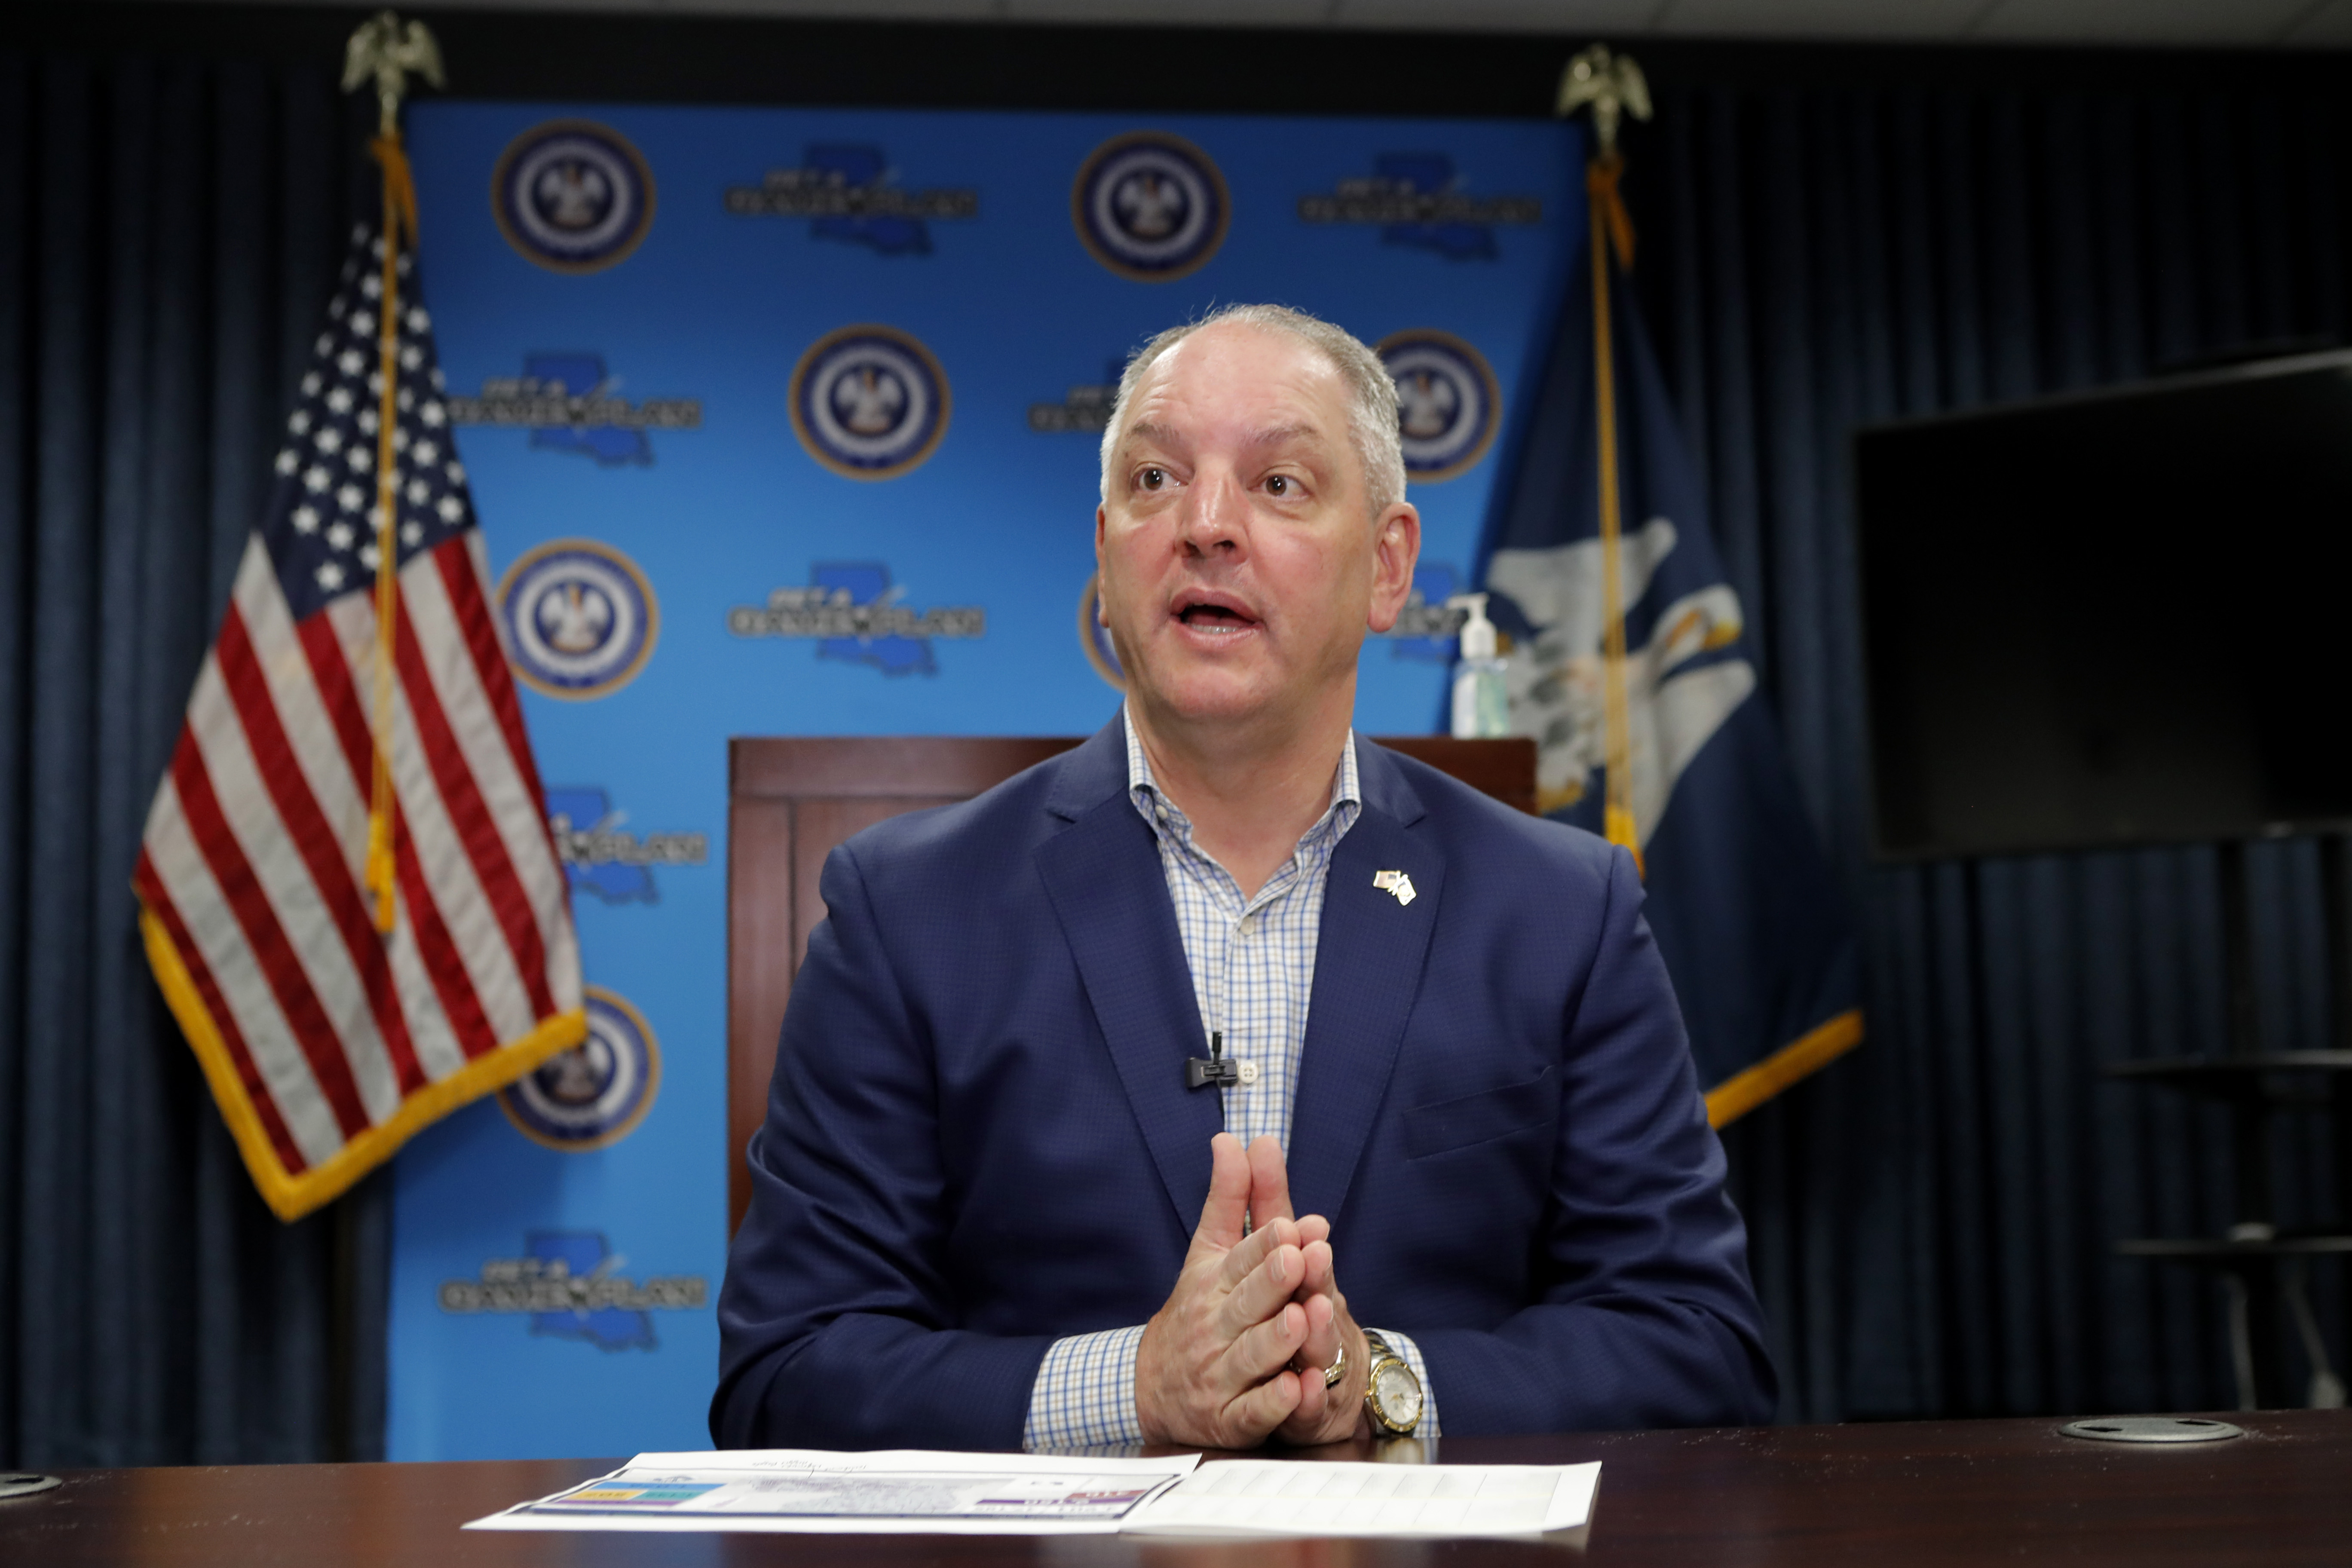 Louisiana Gov. John Bel Edwards speaks about the impact of the novel coronavirus pandemic on the state during an interview with the Associated Press in Baton Rouge, Louisiana, on April 3.